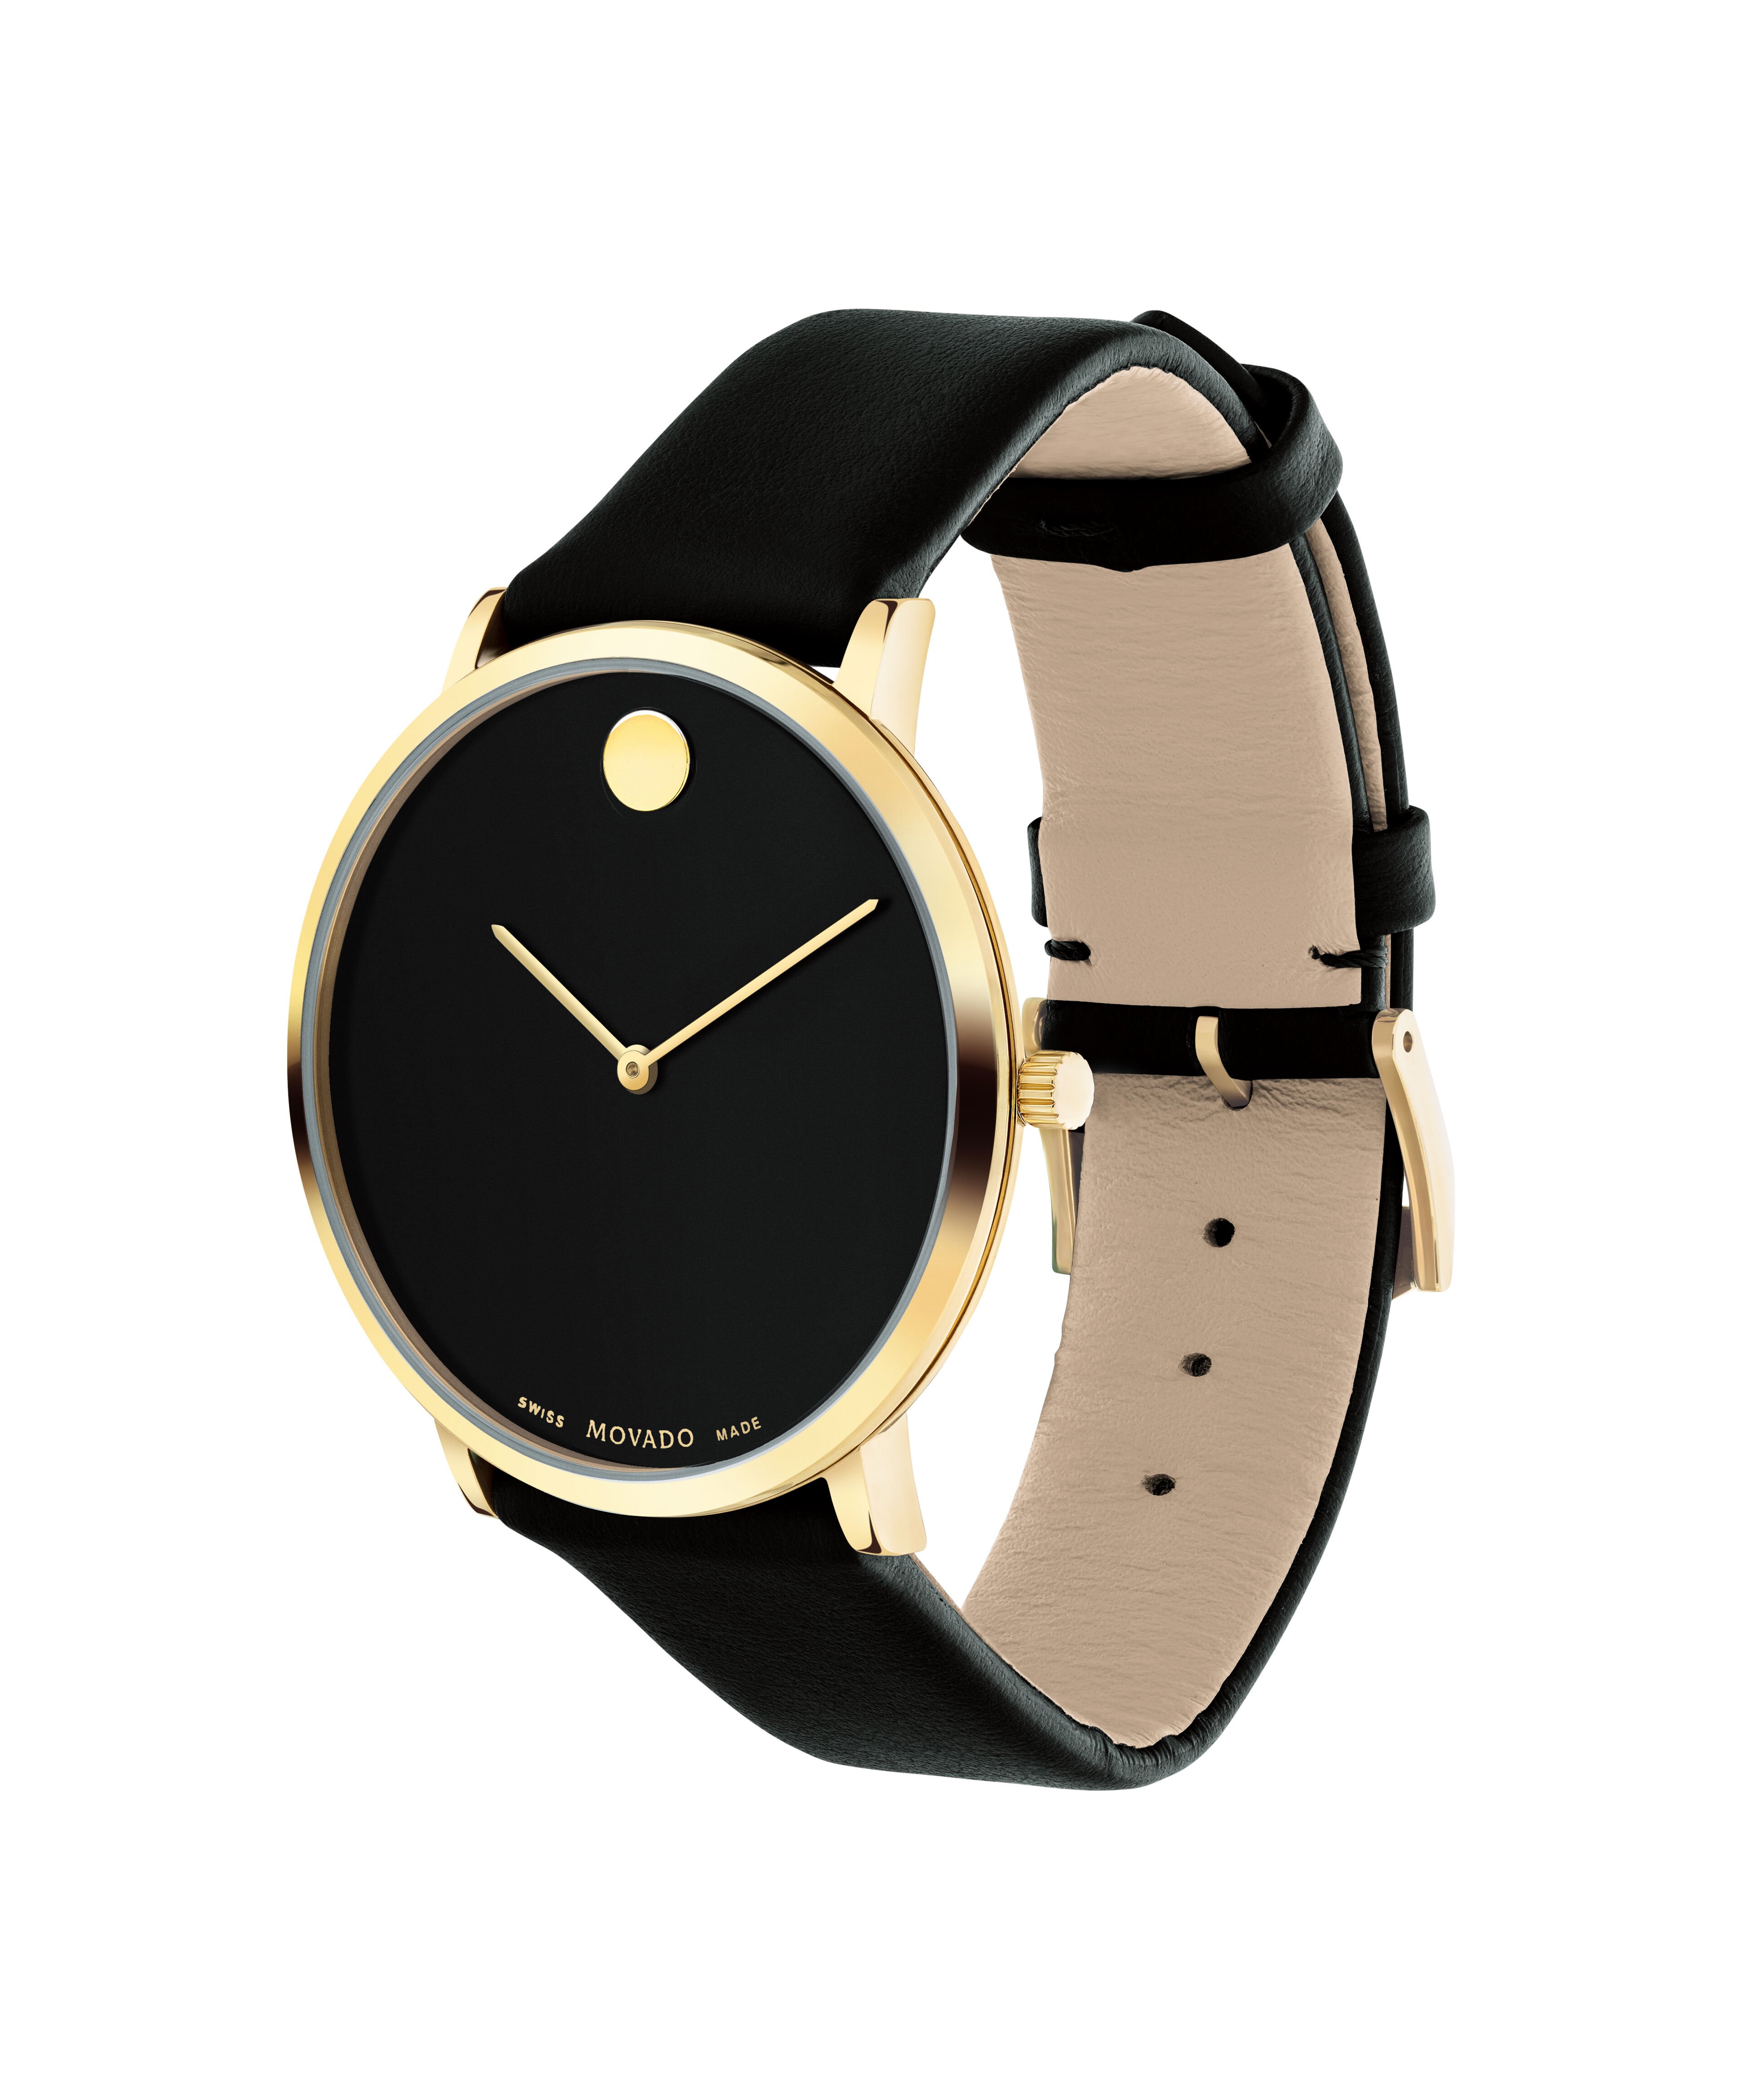 Buy Replica Watches Using Paypal